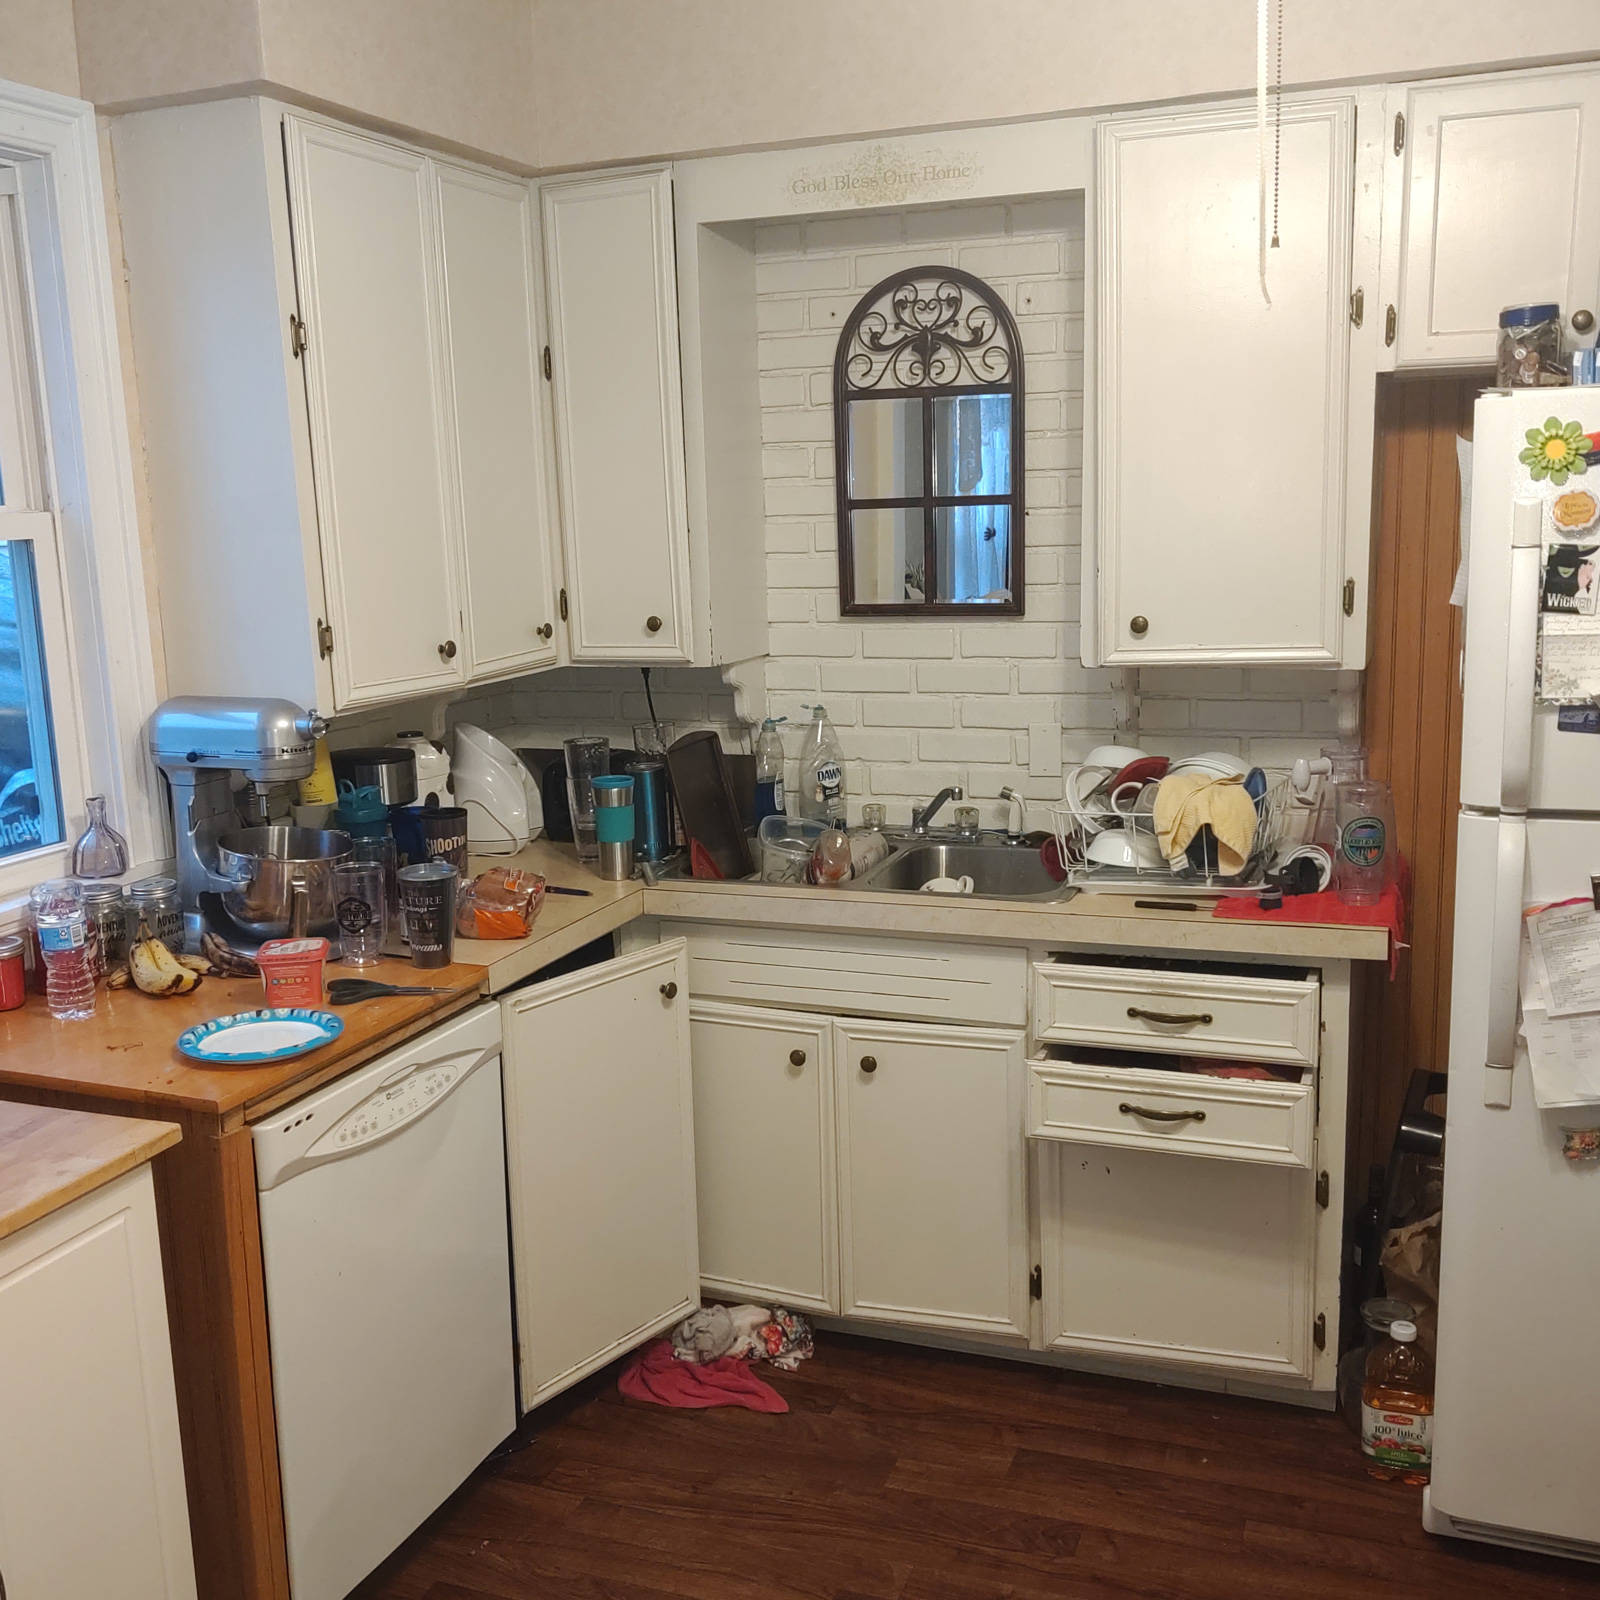 Entry 8 - Non-functioning cabinetry makes this kitchen a nightmare